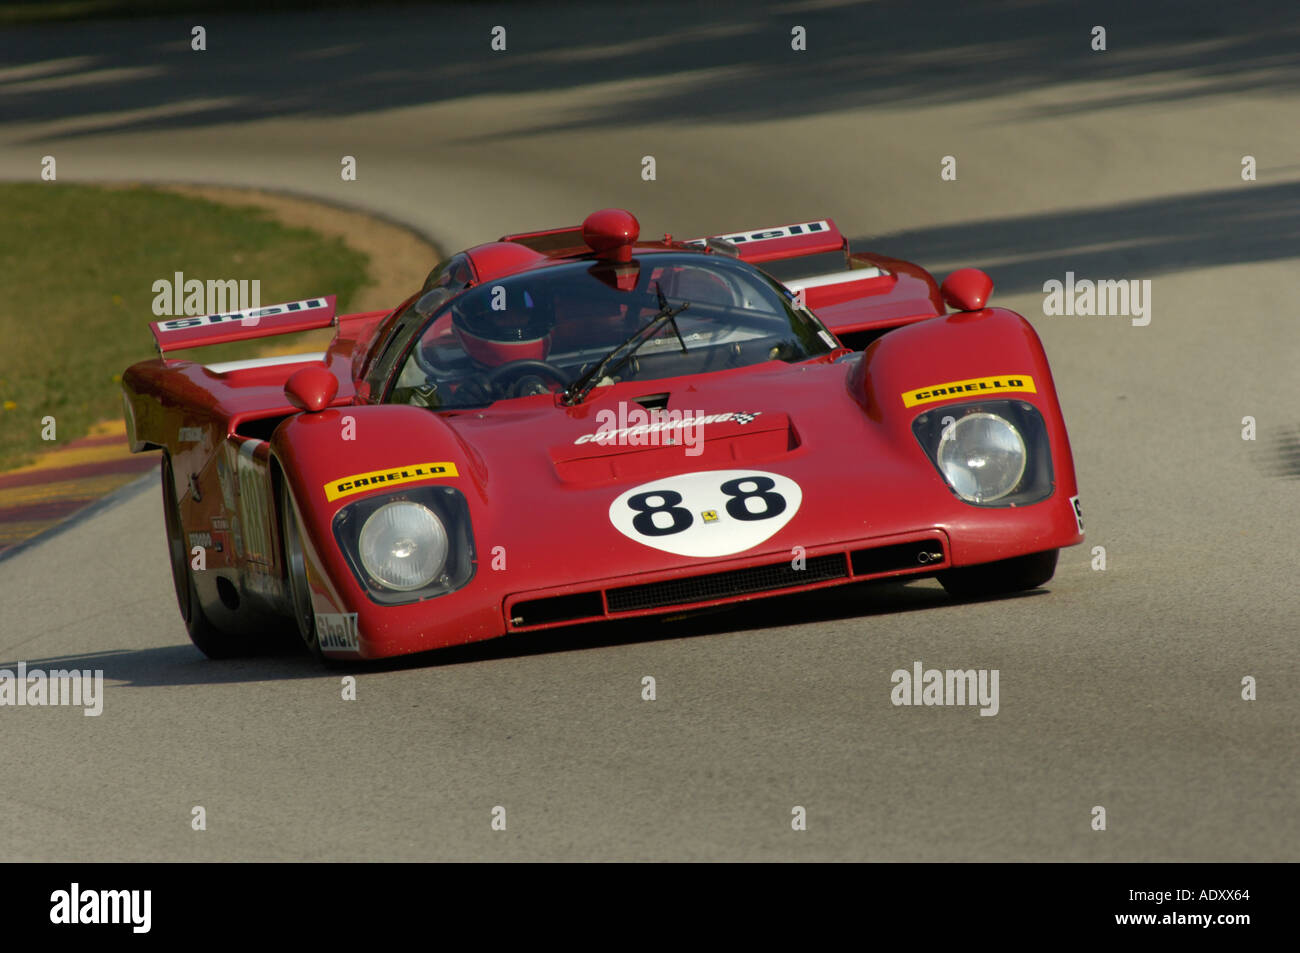 William Cotter races his 1970 Ferrari 512 at the Brian Redman International Challenge at Road America 2005 Stock Photo